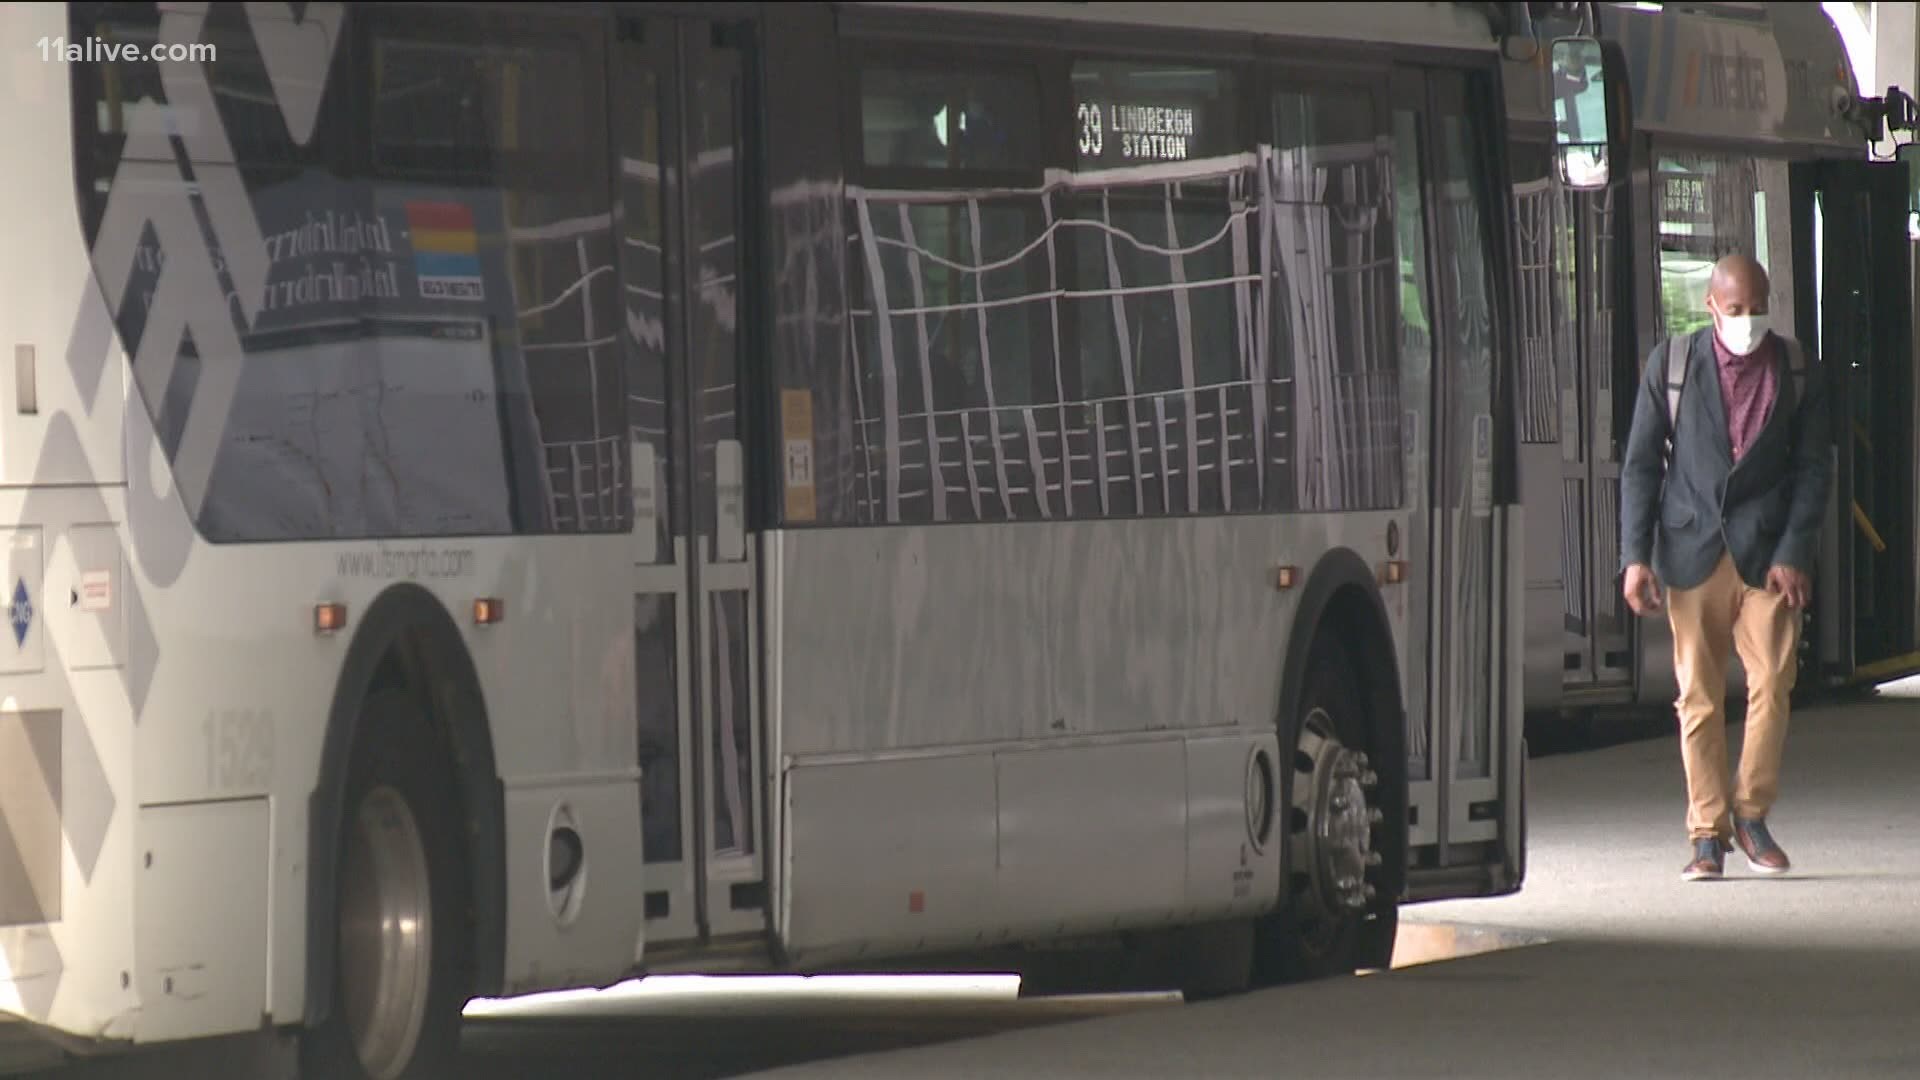 MARTA will use the funds for a new multi-use bus facility as part of the transit system's expansion in Clayton County.